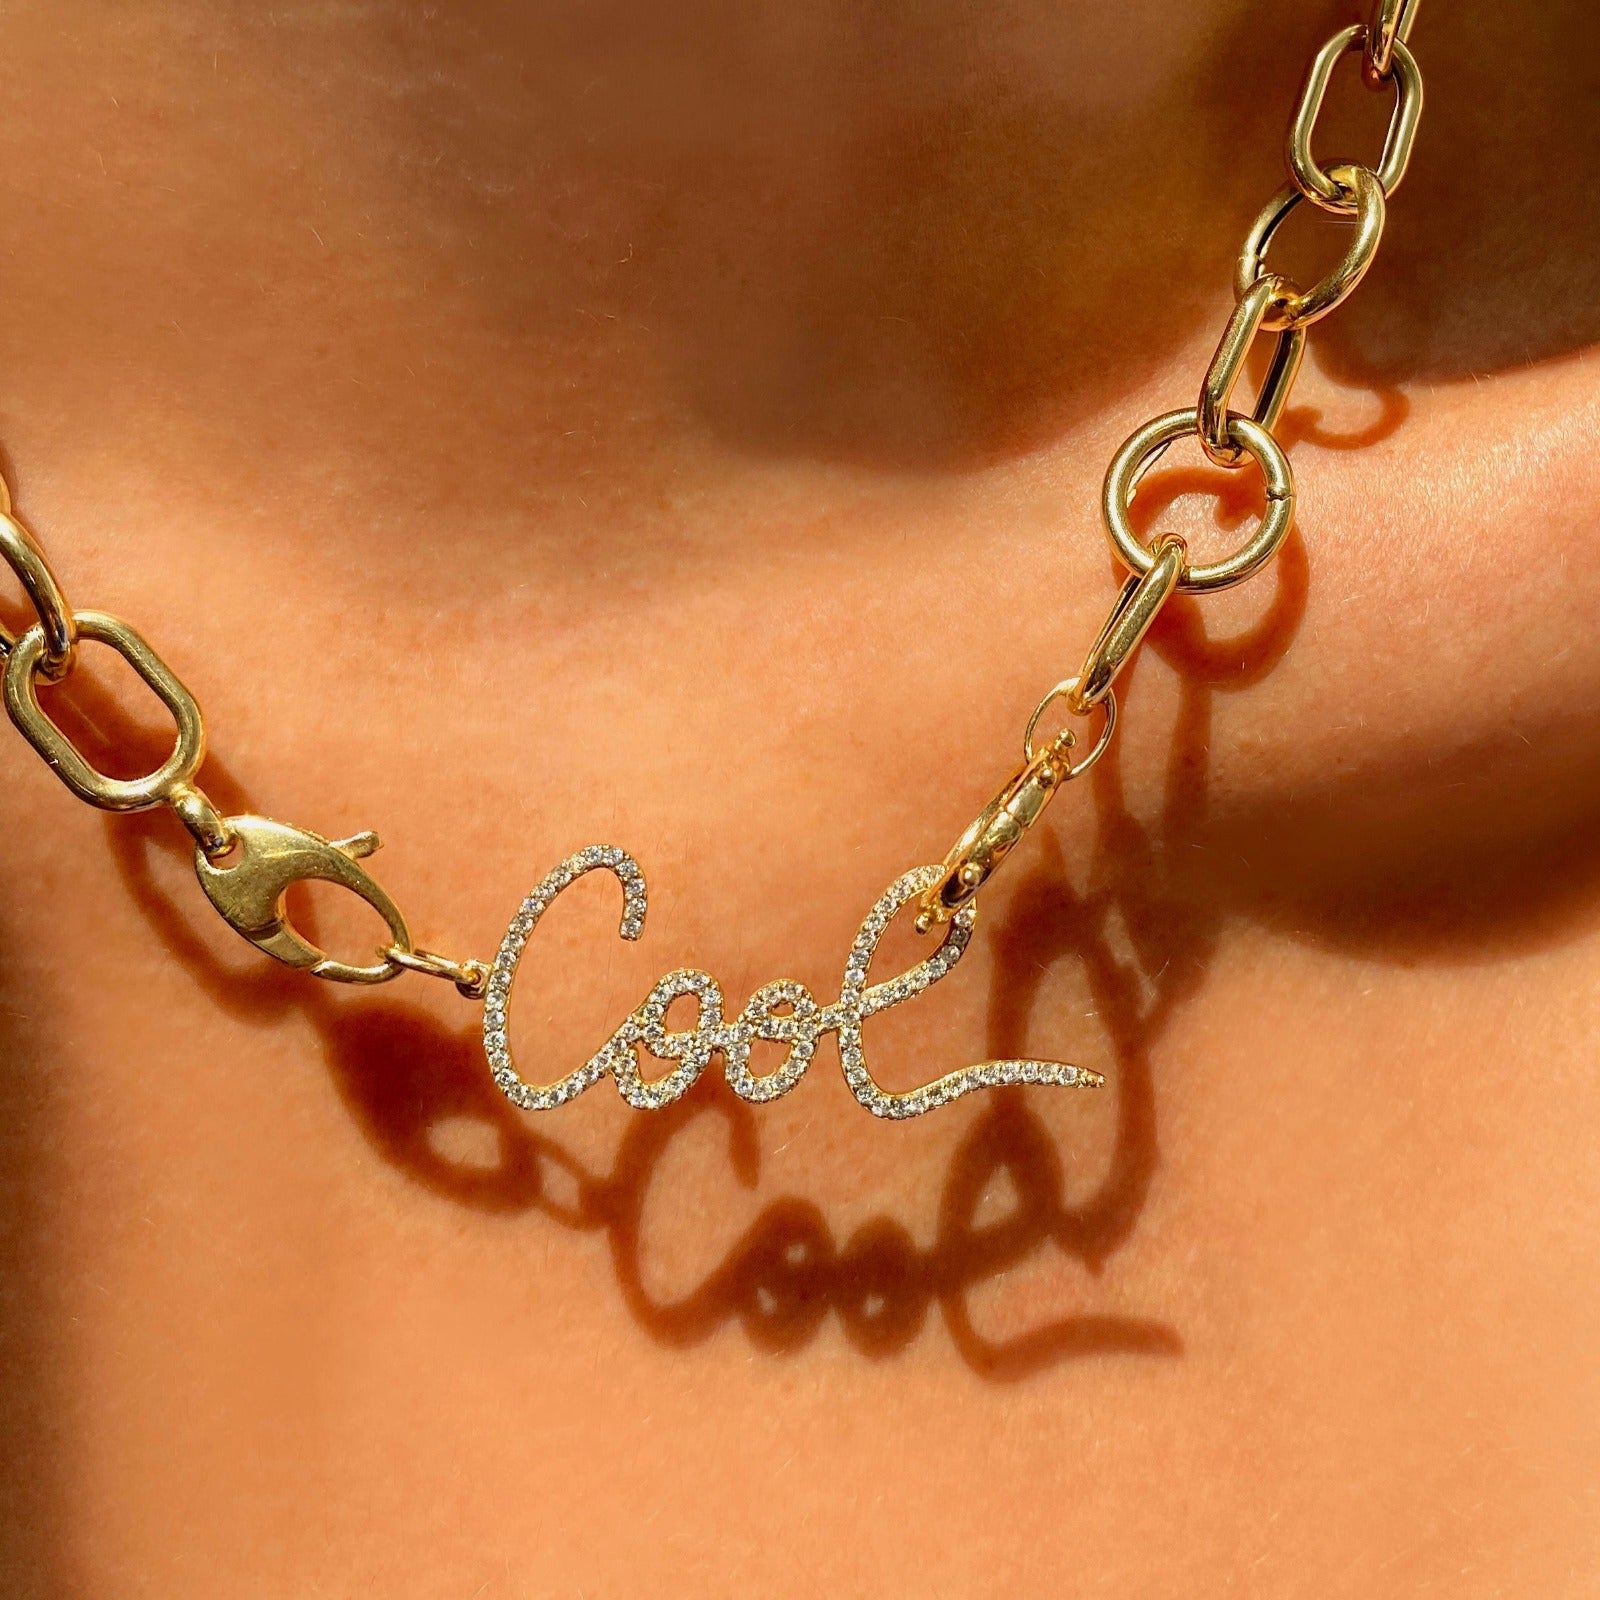 14k gold Pavé Graffiti 'Cool' Charm. Styled on a neck hanging from the lobster clasps of a chain necklace 